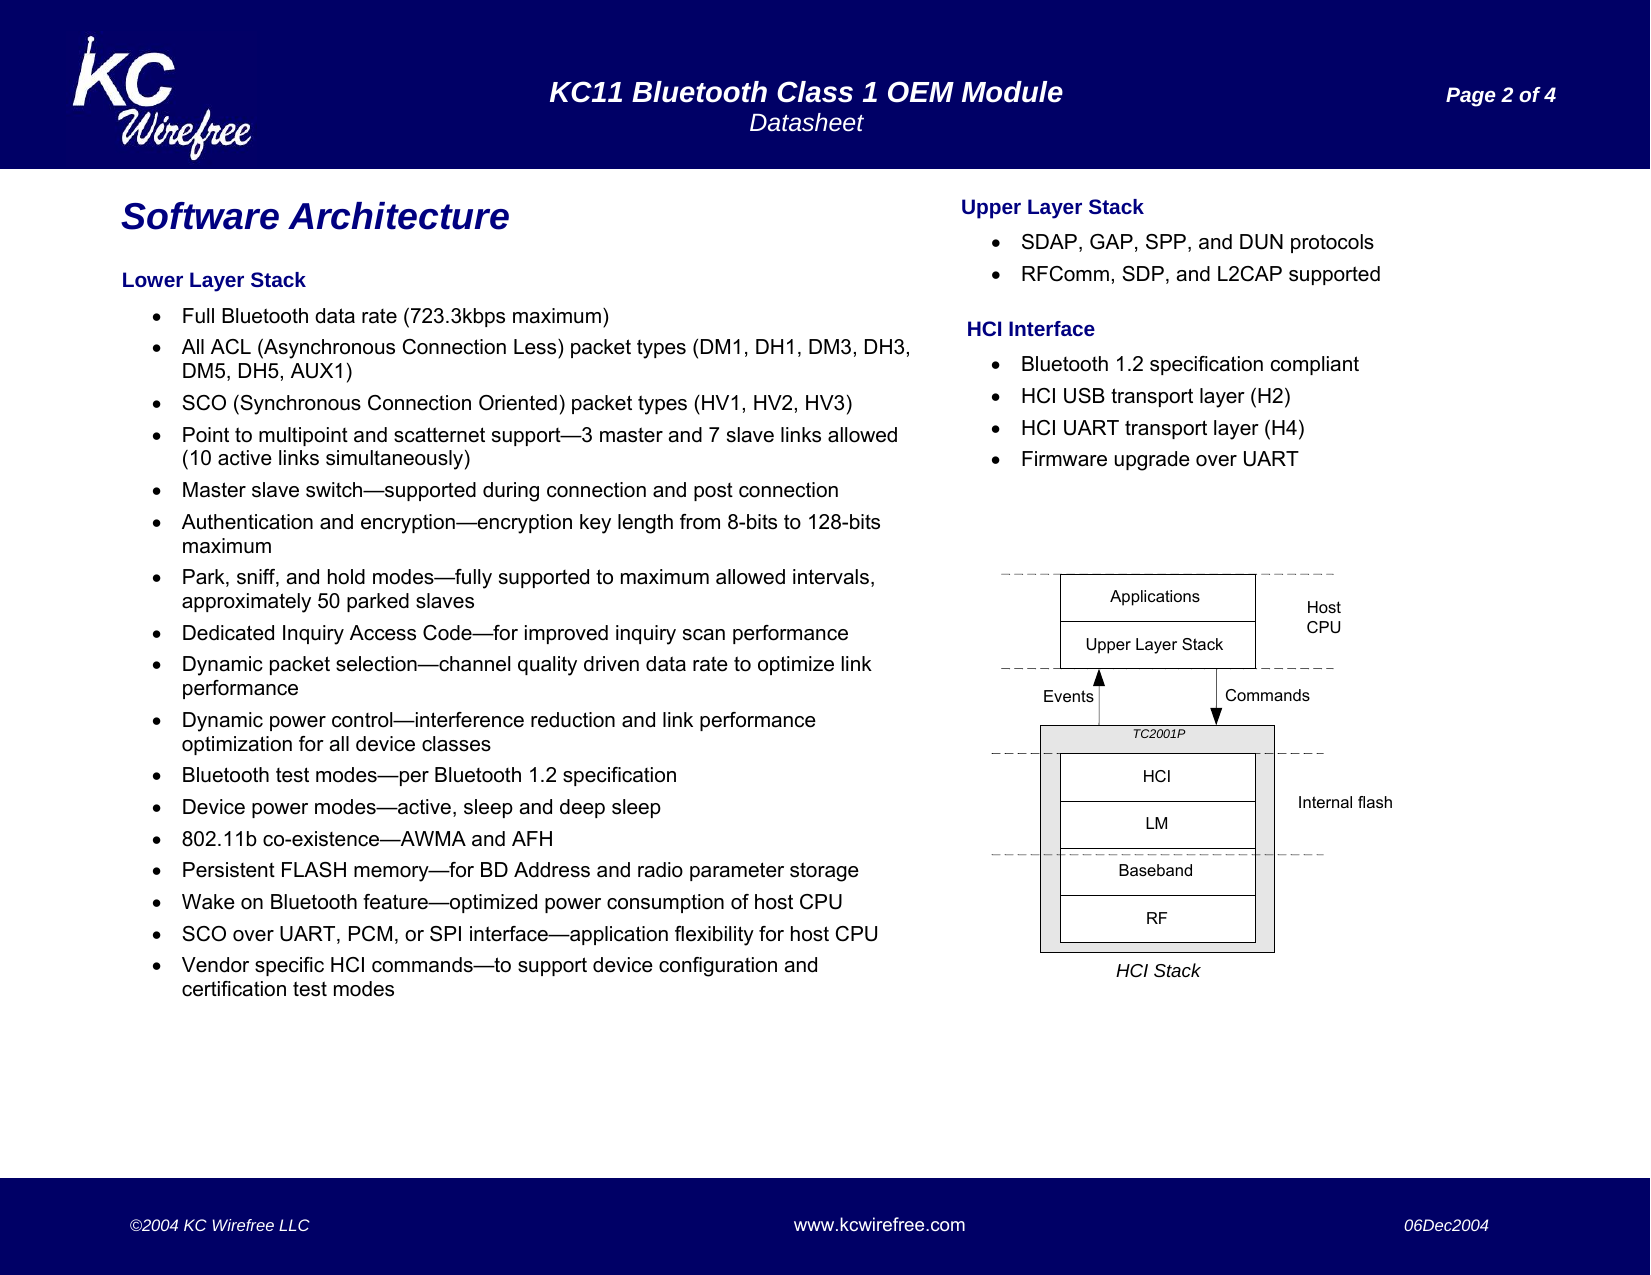   KC11 Bluetooth Class 1 OEM Module  Page 2 of 4  Datasheet    ©2004 KC Wirefree LLC www.kcwirefree.com  06Dec2004   ApplicationsEventsRFBasebandLMHCIUpper Layer StackTC2001PCommandsHCI StackHostCPUInternal flashSoftware Architecture  Lower Layer Stack  •  Full Bluetooth data rate (723.3kbps maximum) •  All ACL (Asynchronous Connection Less) packet types (DM1, DH1, DM3, DH3, DM5, DH5, AUX1) •  SCO (Synchronous Connection Oriented) packet types (HV1, HV2, HV3) •  Point to multipoint and scatternet support—3 master and 7 slave links allowed (10 active links simultaneously) •  Master slave switch—supported during connection and post connection •  Authentication and encryption—encryption key length from 8-bits to 128-bits maximum •  Park, sniff, and hold modes—fully supported to maximum allowed intervals, approximately 50 parked slaves •  Dedicated Inquiry Access Code—for improved inquiry scan performance •  Dynamic packet selection—channel quality driven data rate to optimize link performance •  Dynamic power control—interference reduction and link performance optimization for all device classes •  Bluetooth test modes—per Bluetooth 1.2 specification •  Device power modes—active, sleep and deep sleep •  802.11b co-existence—AWMA and AFH  •  Persistent FLASH memory—for BD Address and radio parameter storage •  Wake on Bluetooth feature—optimized power consumption of host CPU •  SCO over UART, PCM, or SPI interface—application flexibility for host CPU •  Vendor specific HCI commands—to support device configuration and certification test modes Upper Layer Stack •  SDAP, GAP, SPP, and DUN protocols •  RFComm, SDP, and L2CAP supported   HCI Interface •  Bluetooth 1.2 specification compliant •  HCI USB transport layer (H2) •  HCI UART transport layer (H4) •  Firmware upgrade over UART 